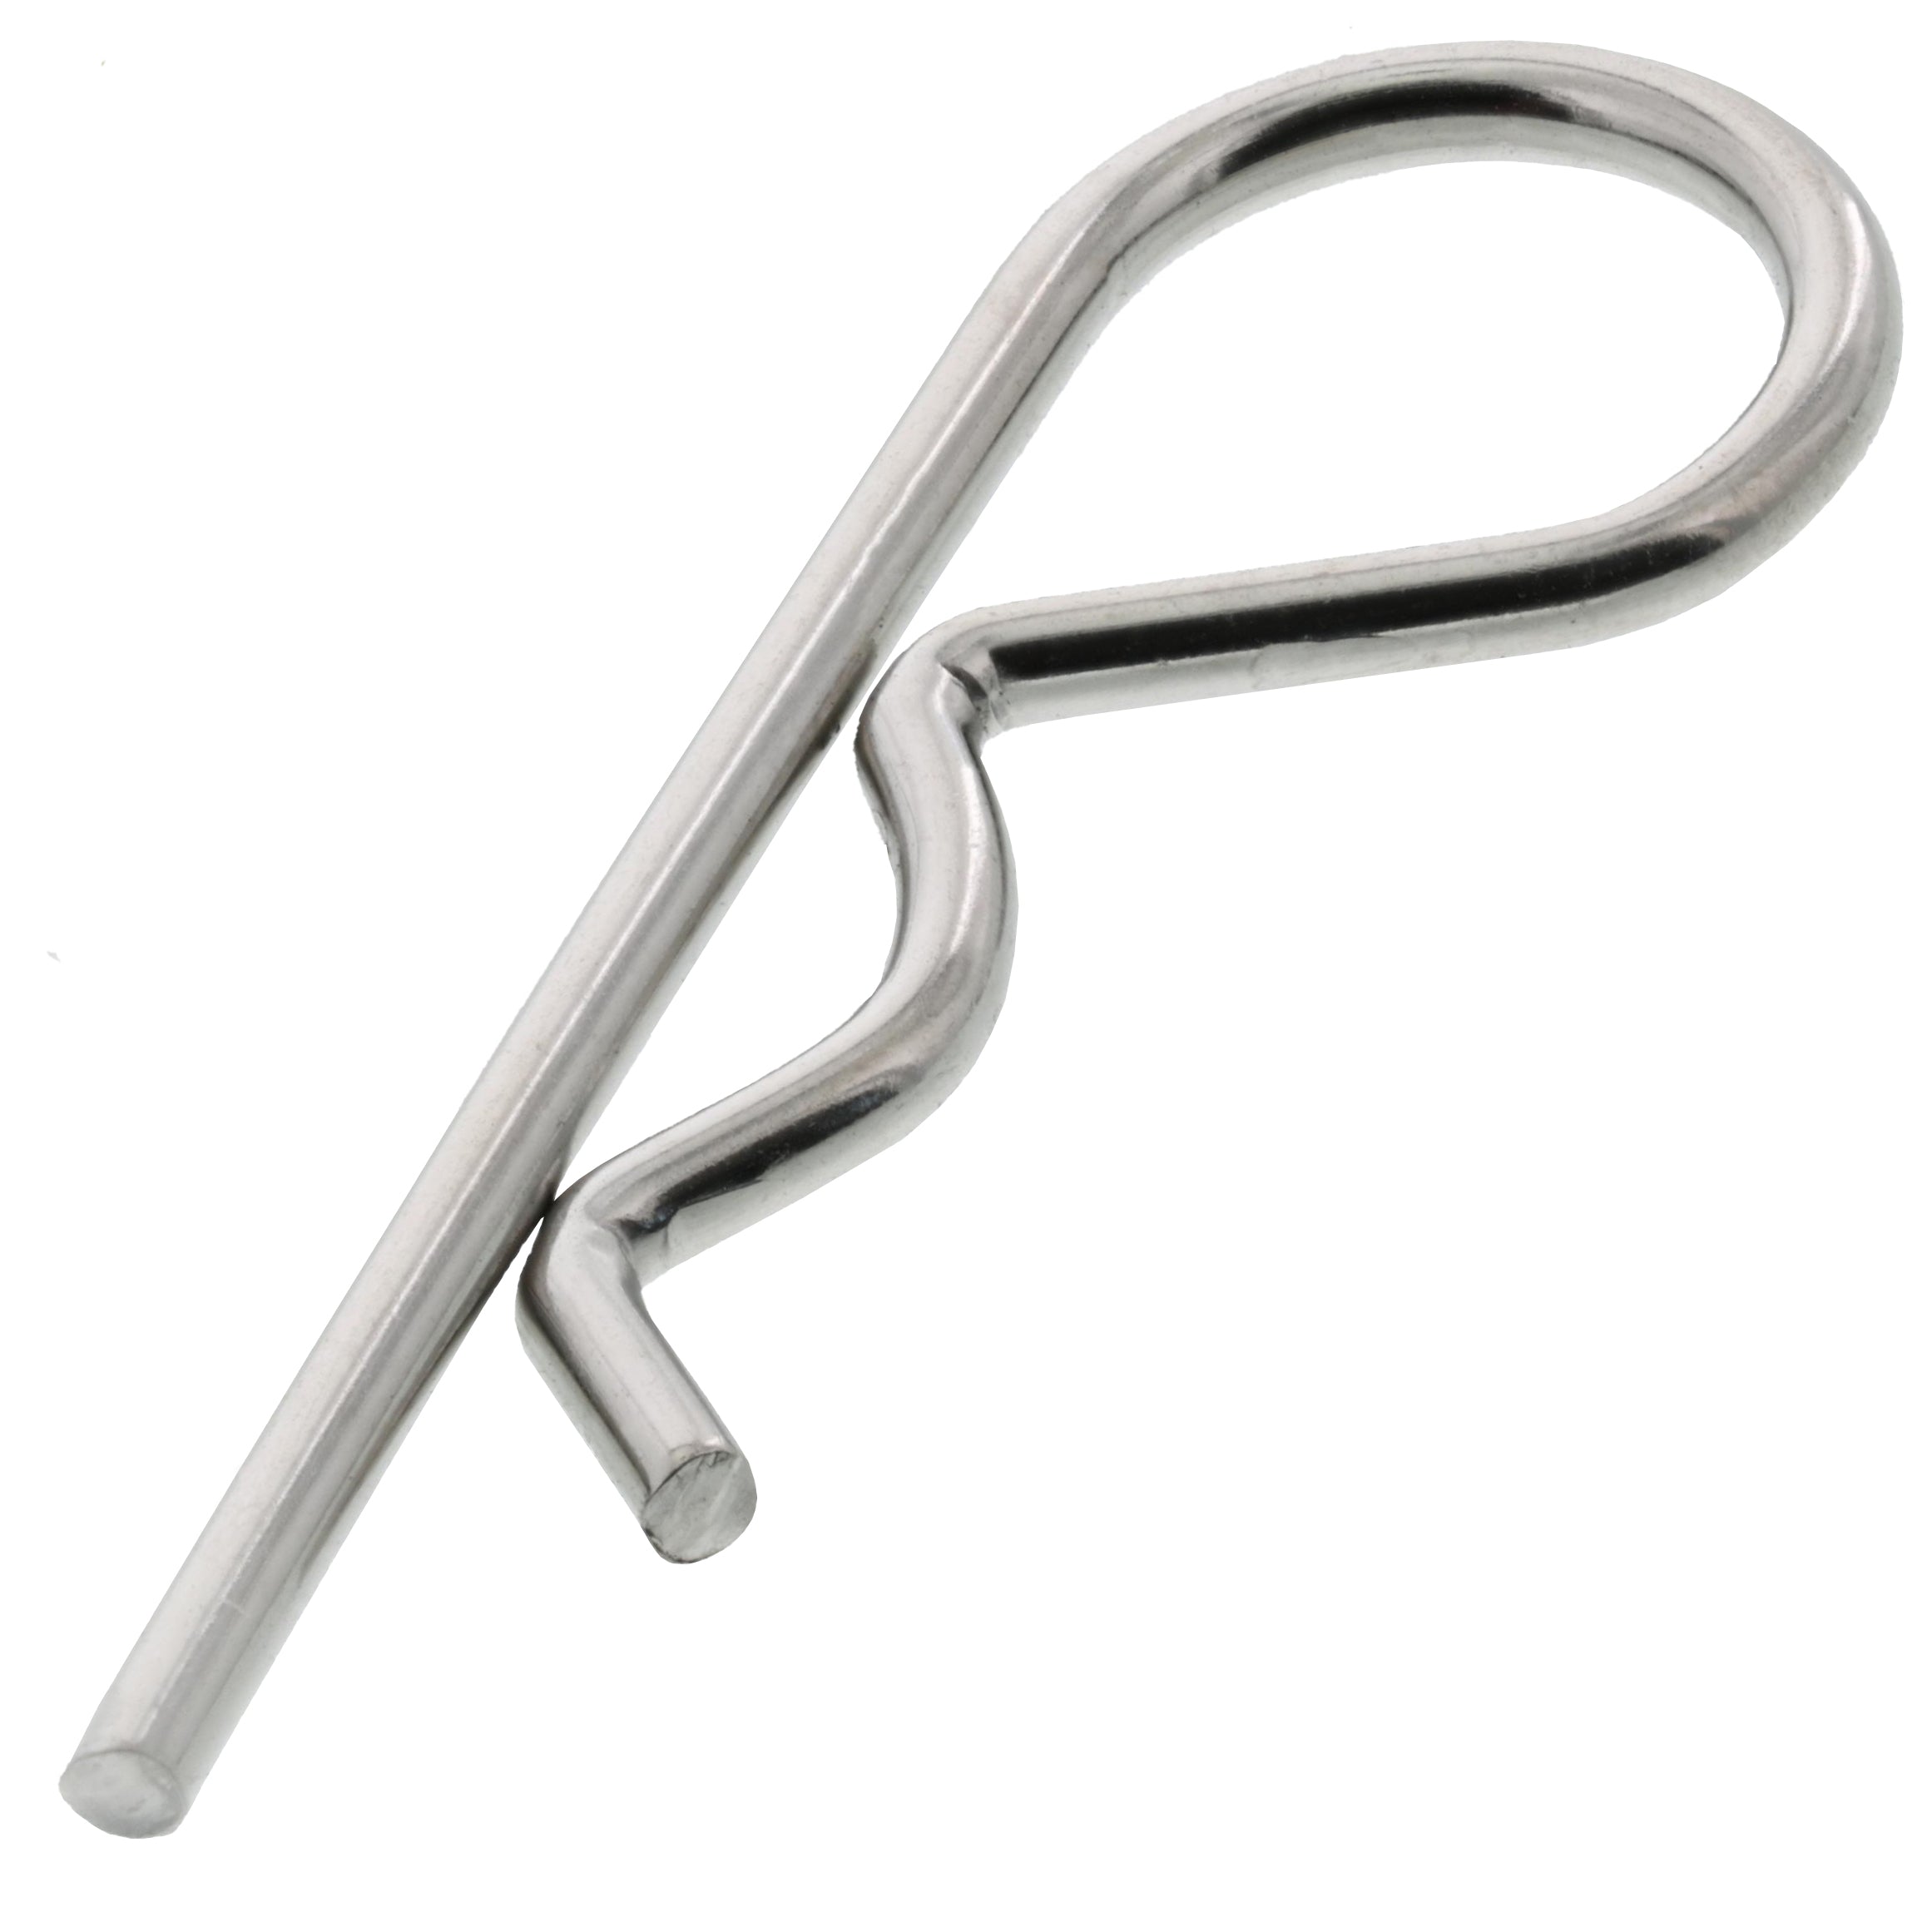 2.5mm Stainless Steel Hairpin Cotter